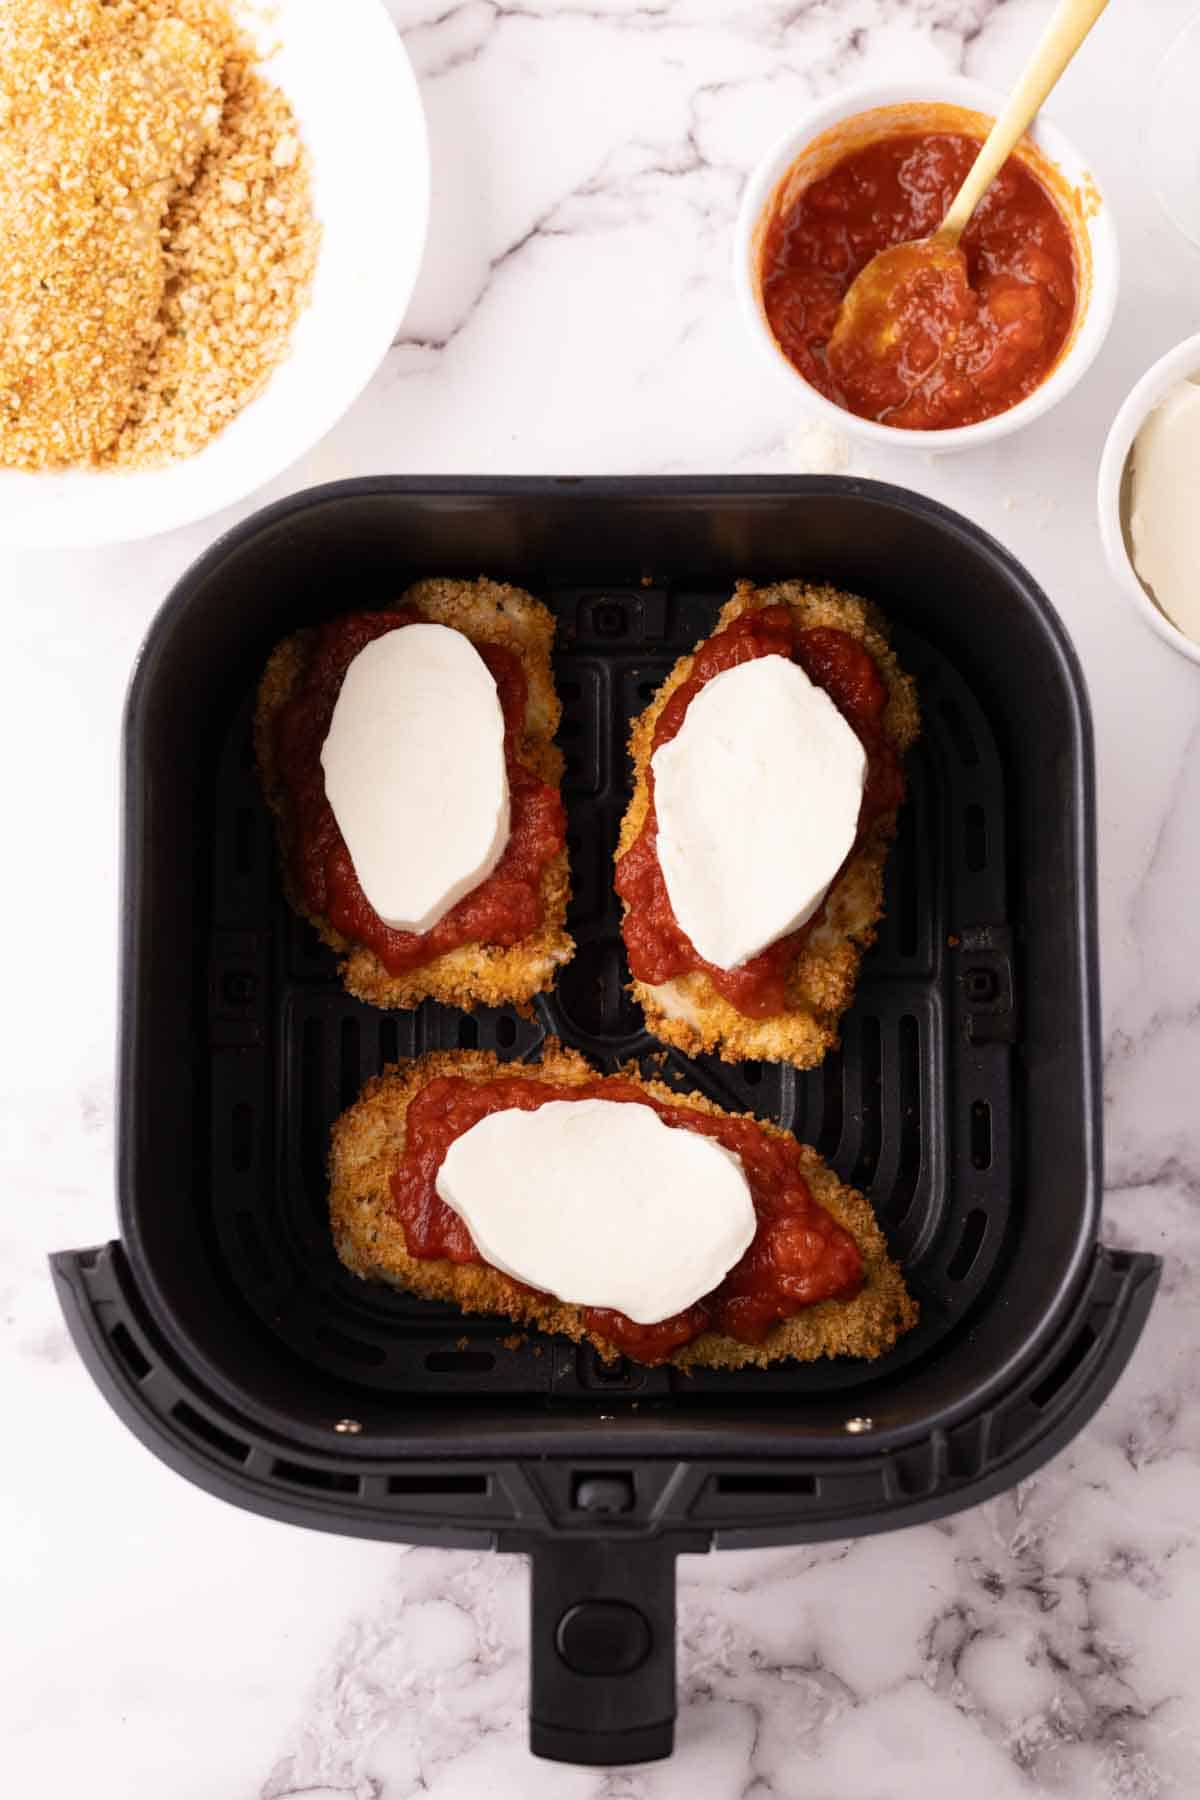 crispy air fried chicken parmesan with red sauce and melted mozzarella in an air fryer basket.